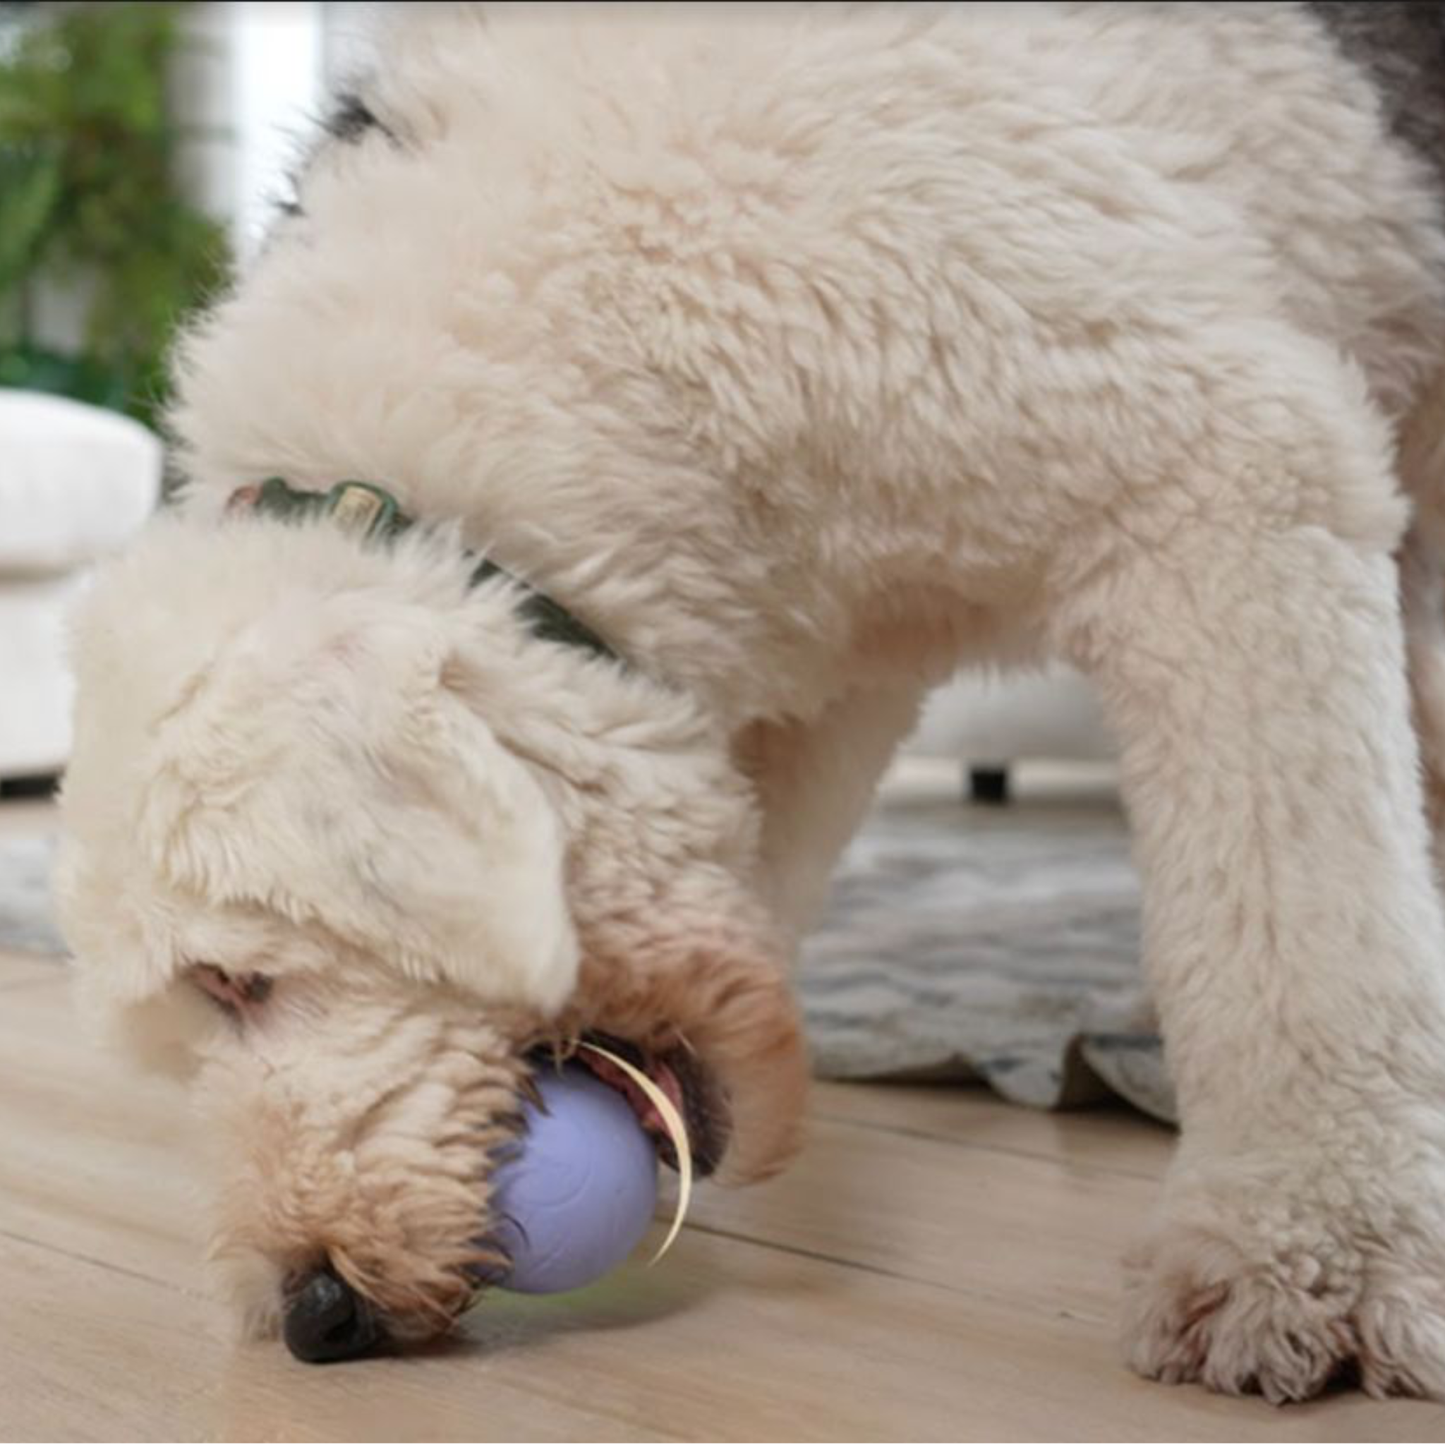 CHEERBLE Wicked Ball SE and PE Automatic Smart Interactive Dog Ball Toy  - Small and Large Size